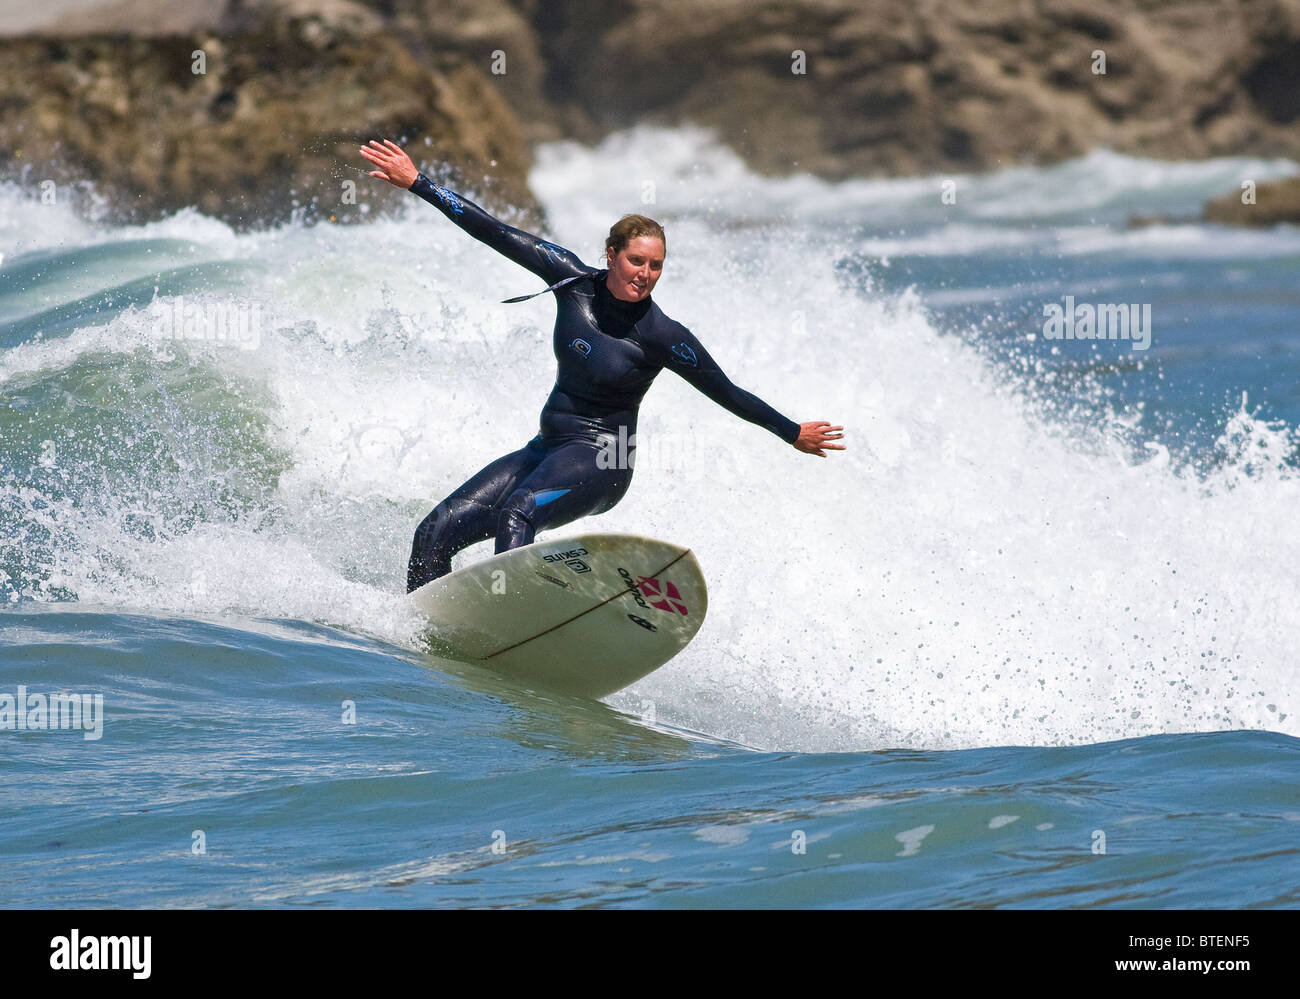 Surfing at St Agnes, Cornwall, UK Stock Photo